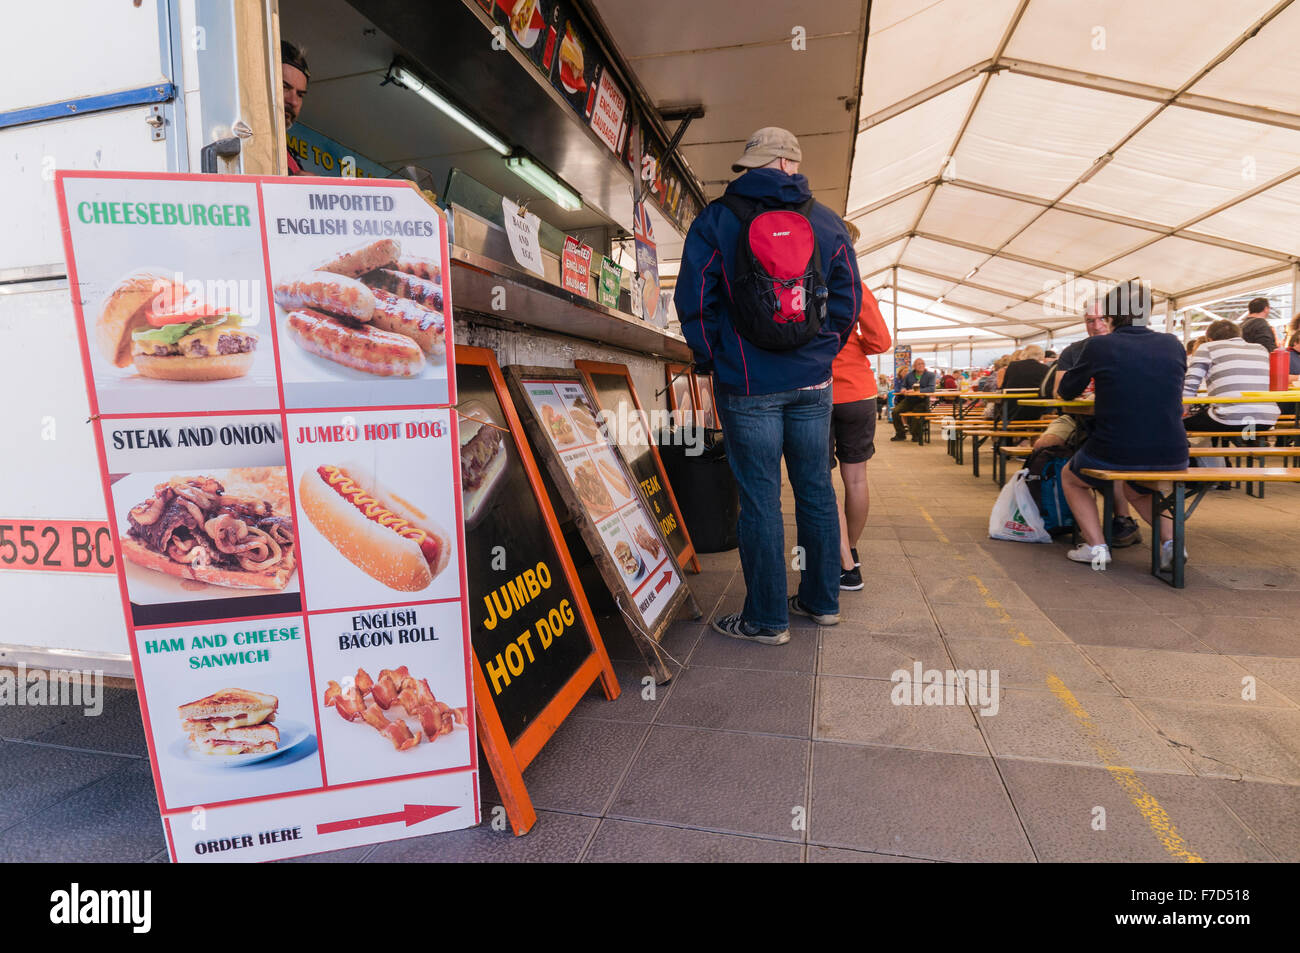 Sign in a Spanish tourist resort market stall advertising real British English food at a cafe van Stock Photo